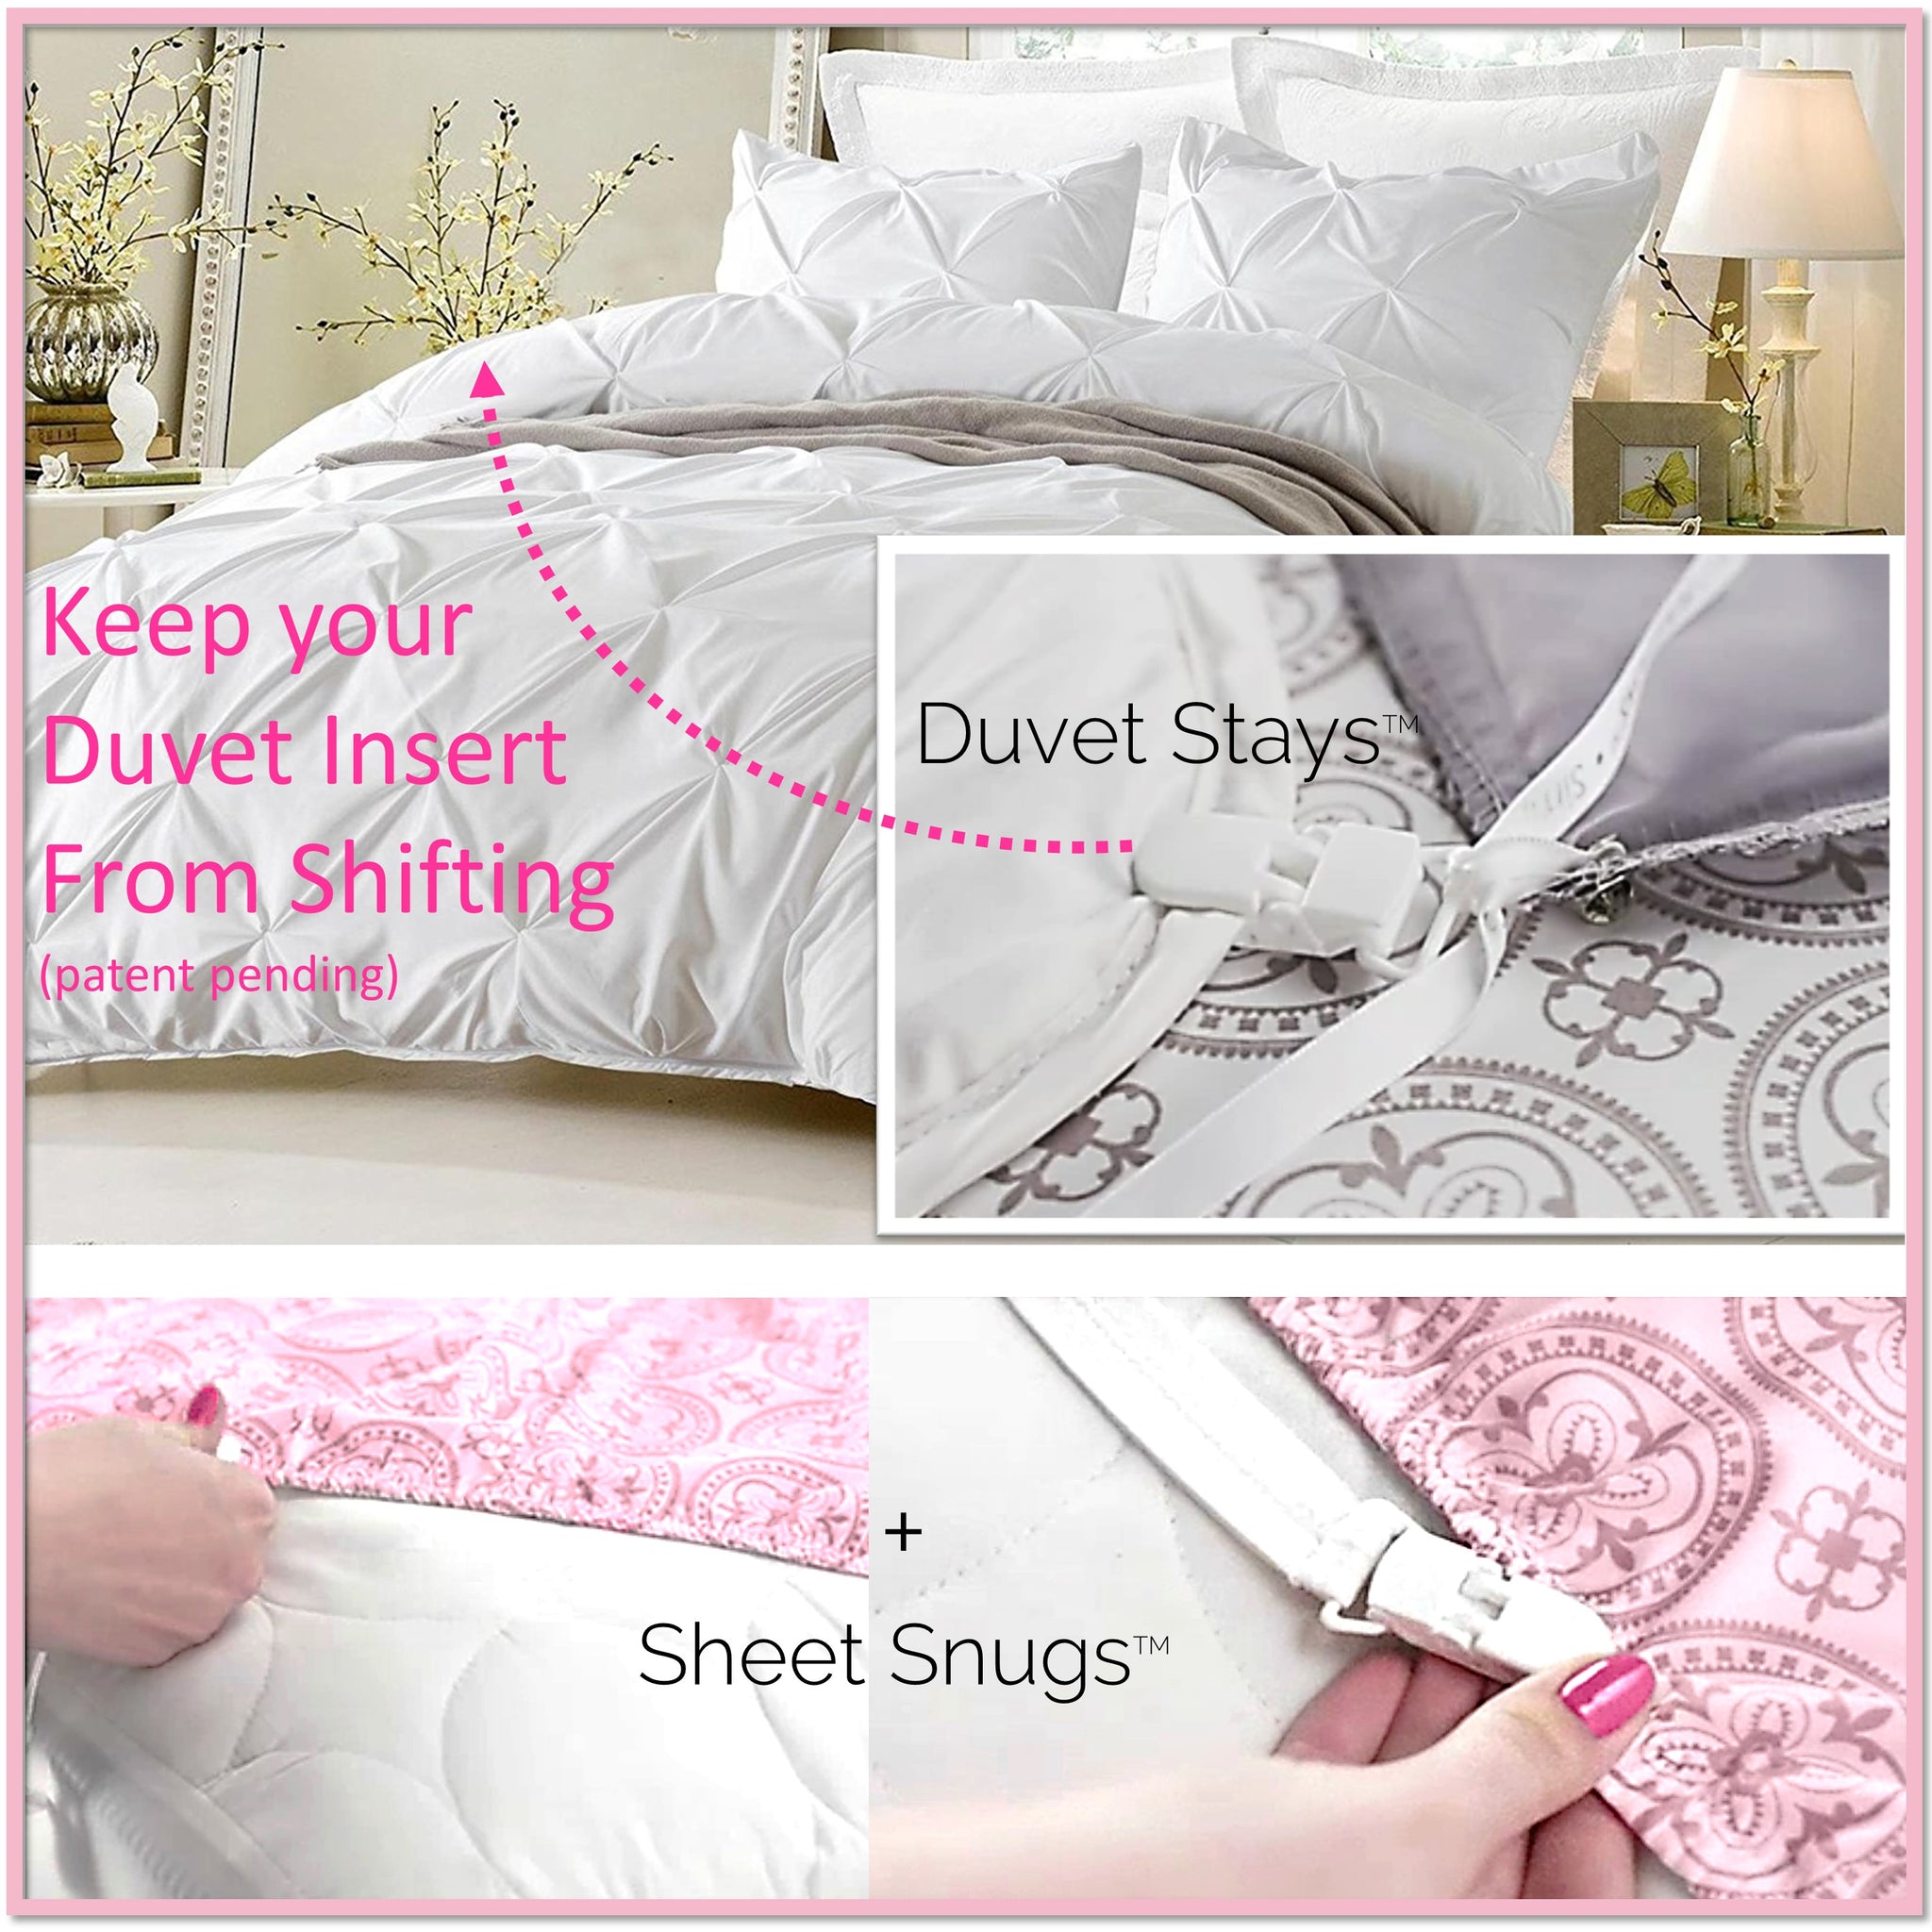 Duvet Stays and Sheet Snugs- The Complete Sleep Tight Bedding System -  Boottique